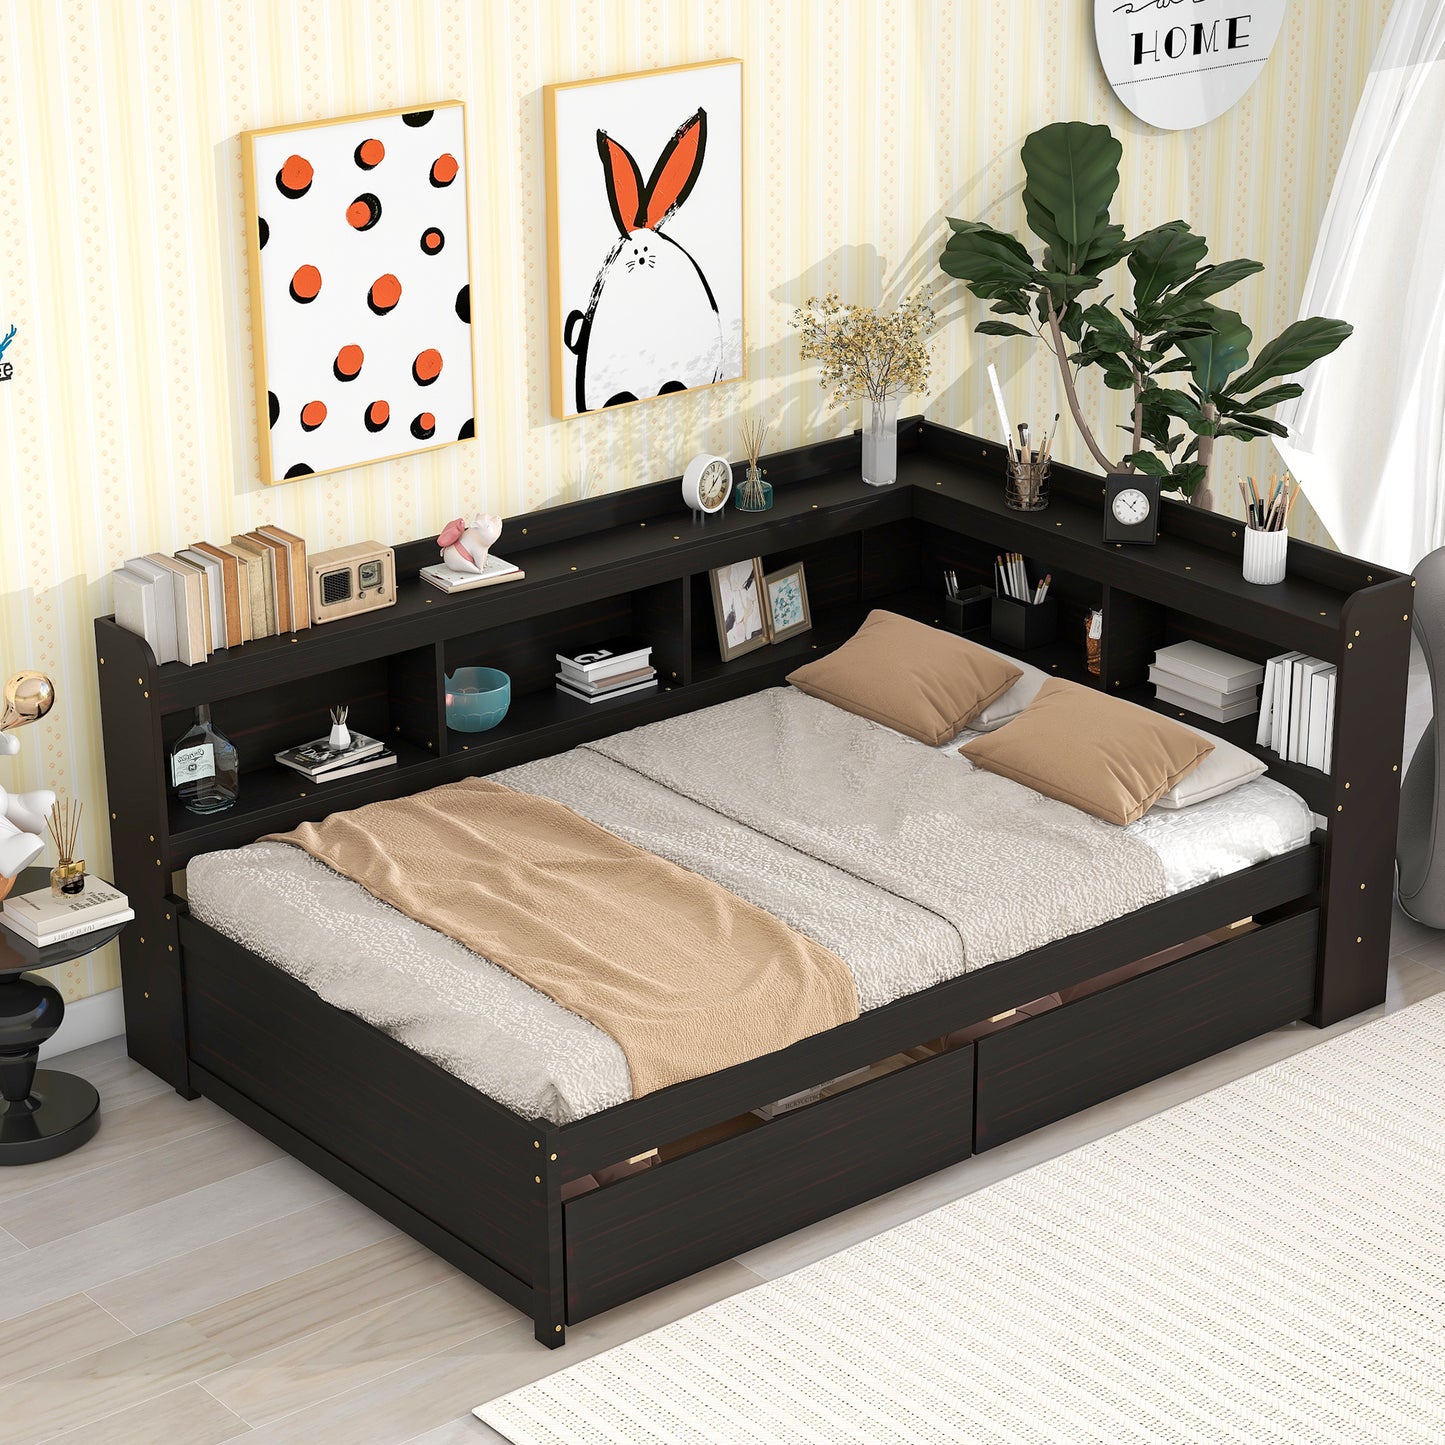 Full Platform Bed with L-shaped Bookcases, Drawers, Espresso